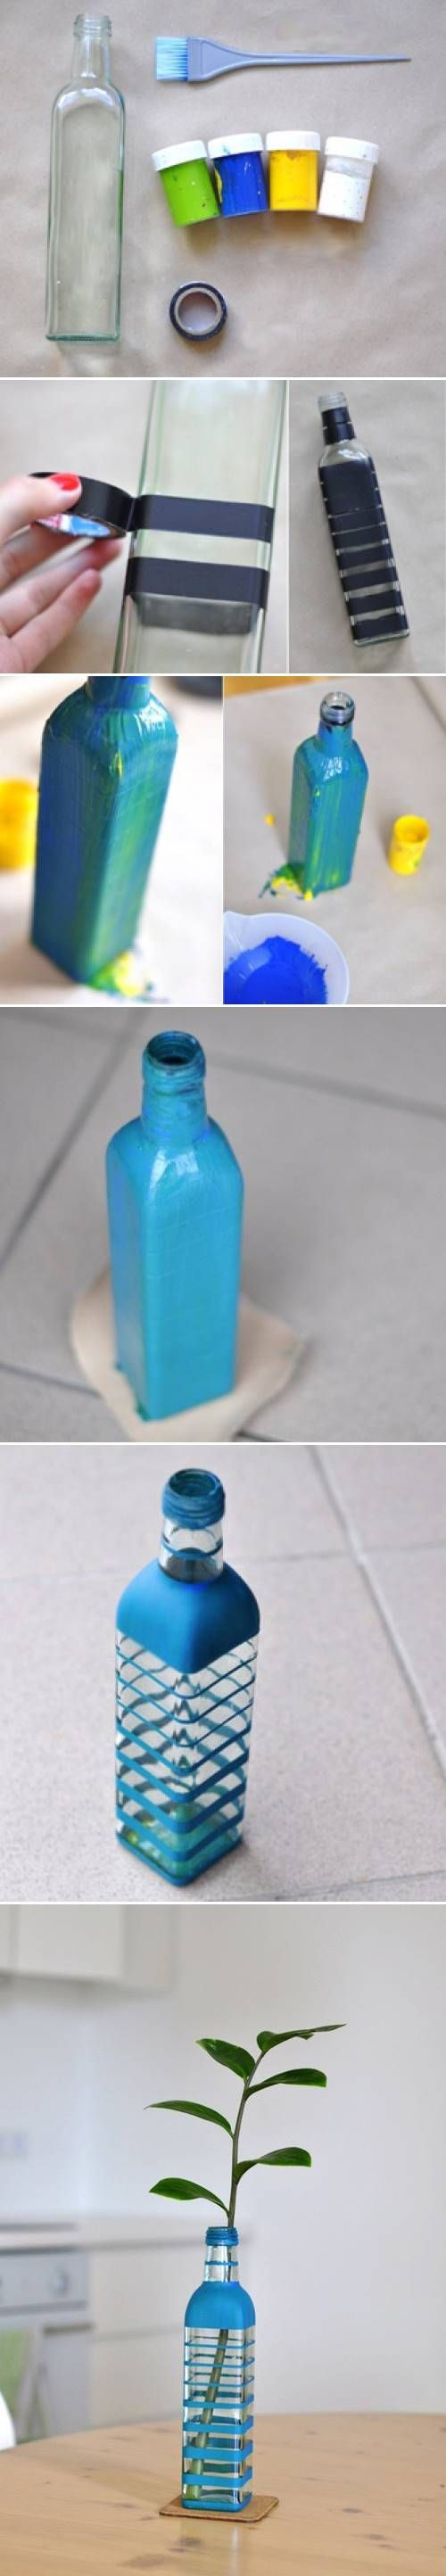 recycled spanish glass vases of how to diy nice vase from recycled glass bottle diy crafts pertaining to how to diy nice vase from recycled glass bottle craft recycle